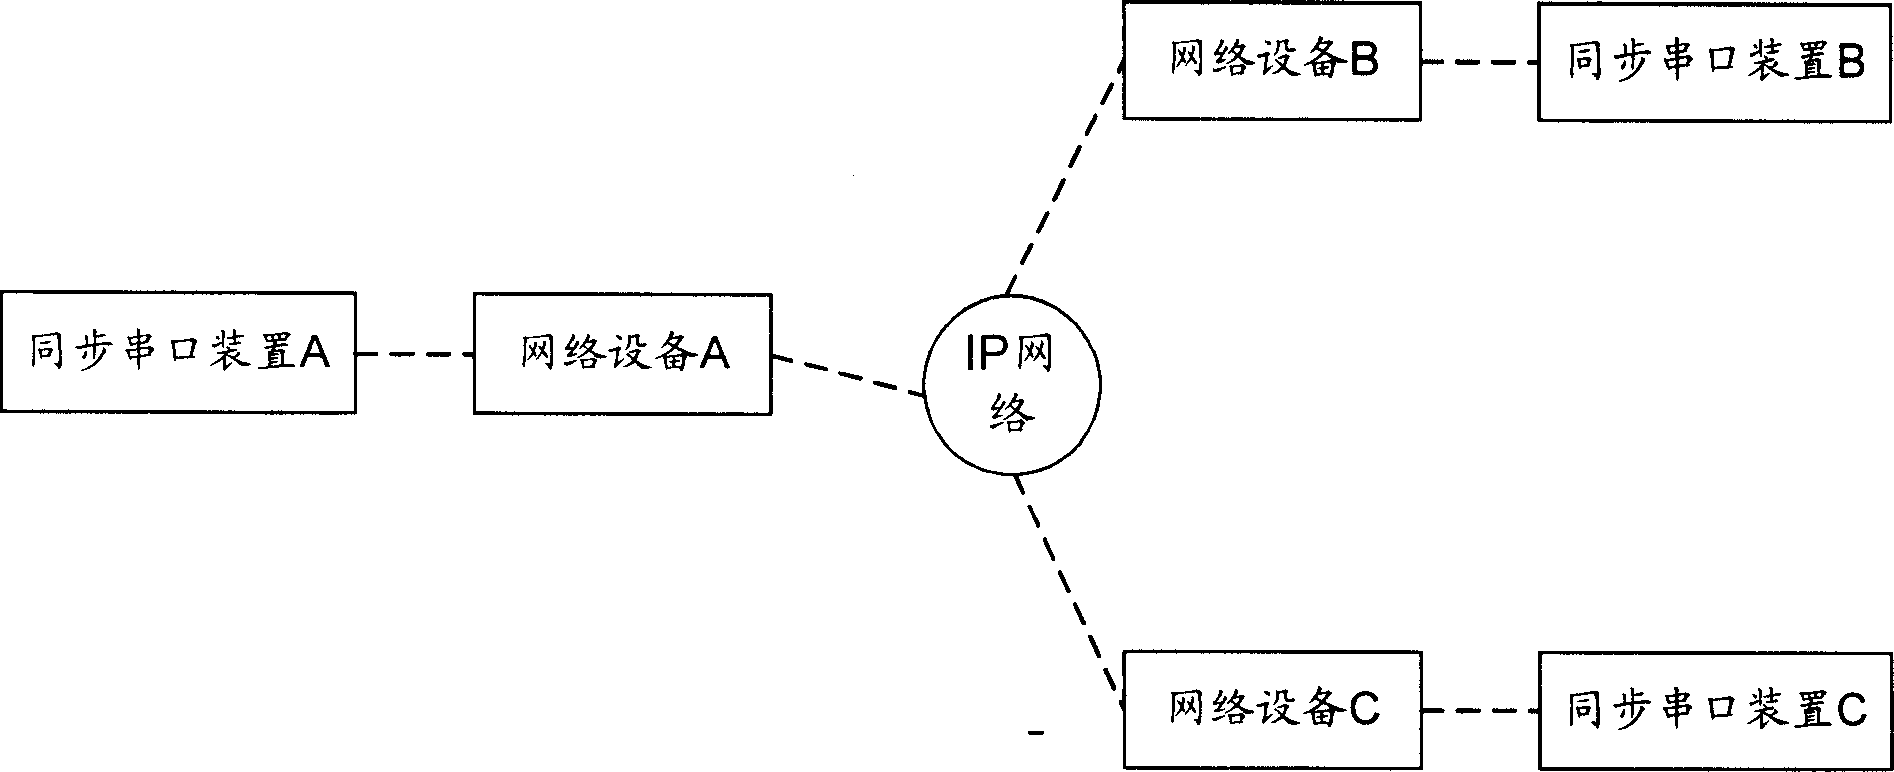 Method for synchronous frame transmitting on IP network and network apparatus for transmission